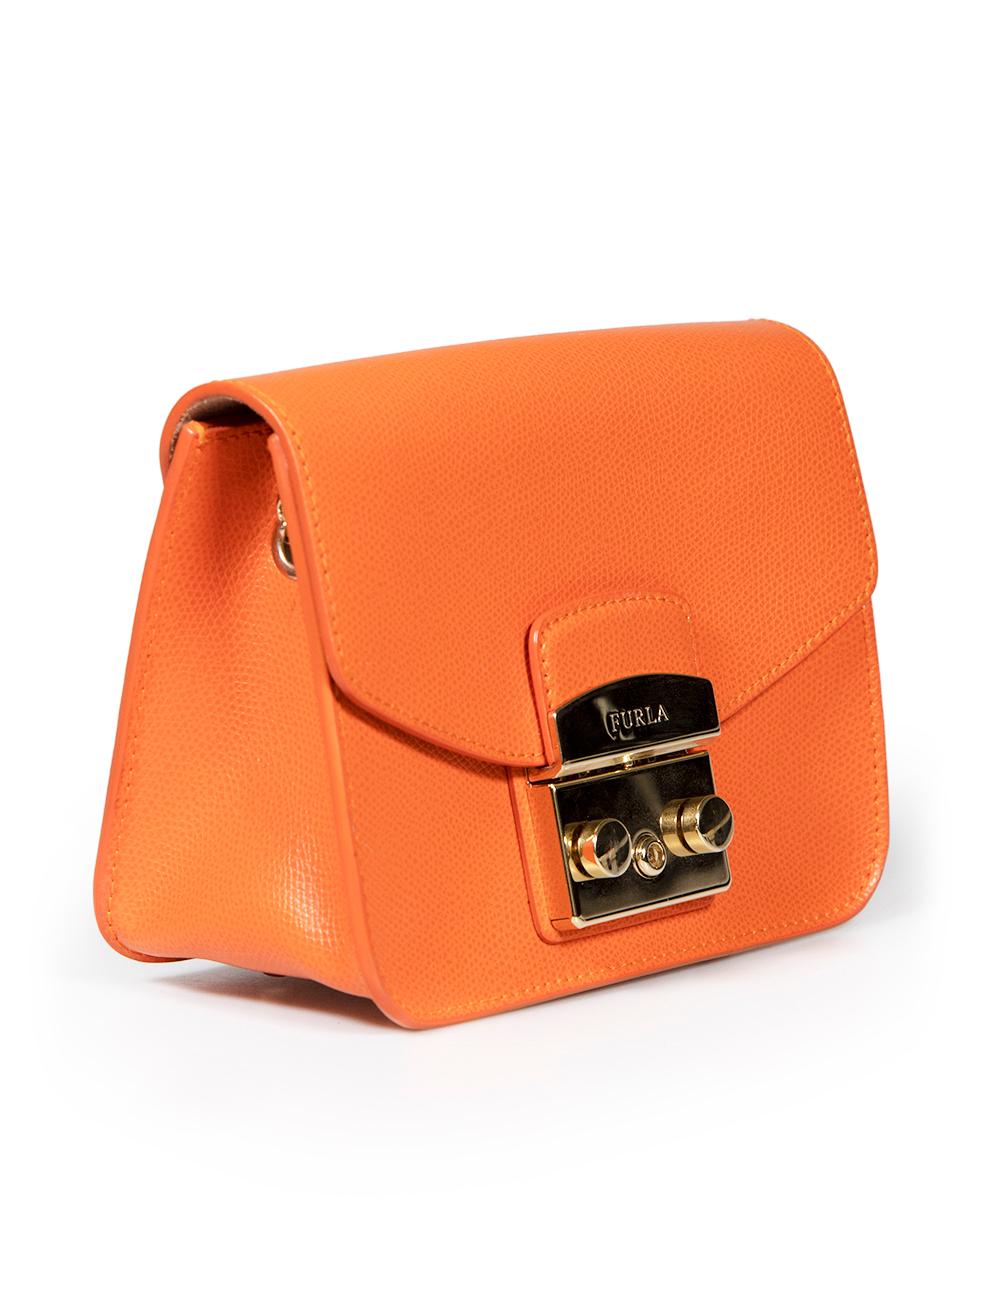 CONDITION is Very good. Minimal wear to bag is evident. Minimal wear to metal hardware closure and base feet with some slight tarnishing on this used Furla designer resale item.
 
 
 
 Details
 
 
 Model: Metropolis
 
 Orange
 
 Leather
 
 Mini